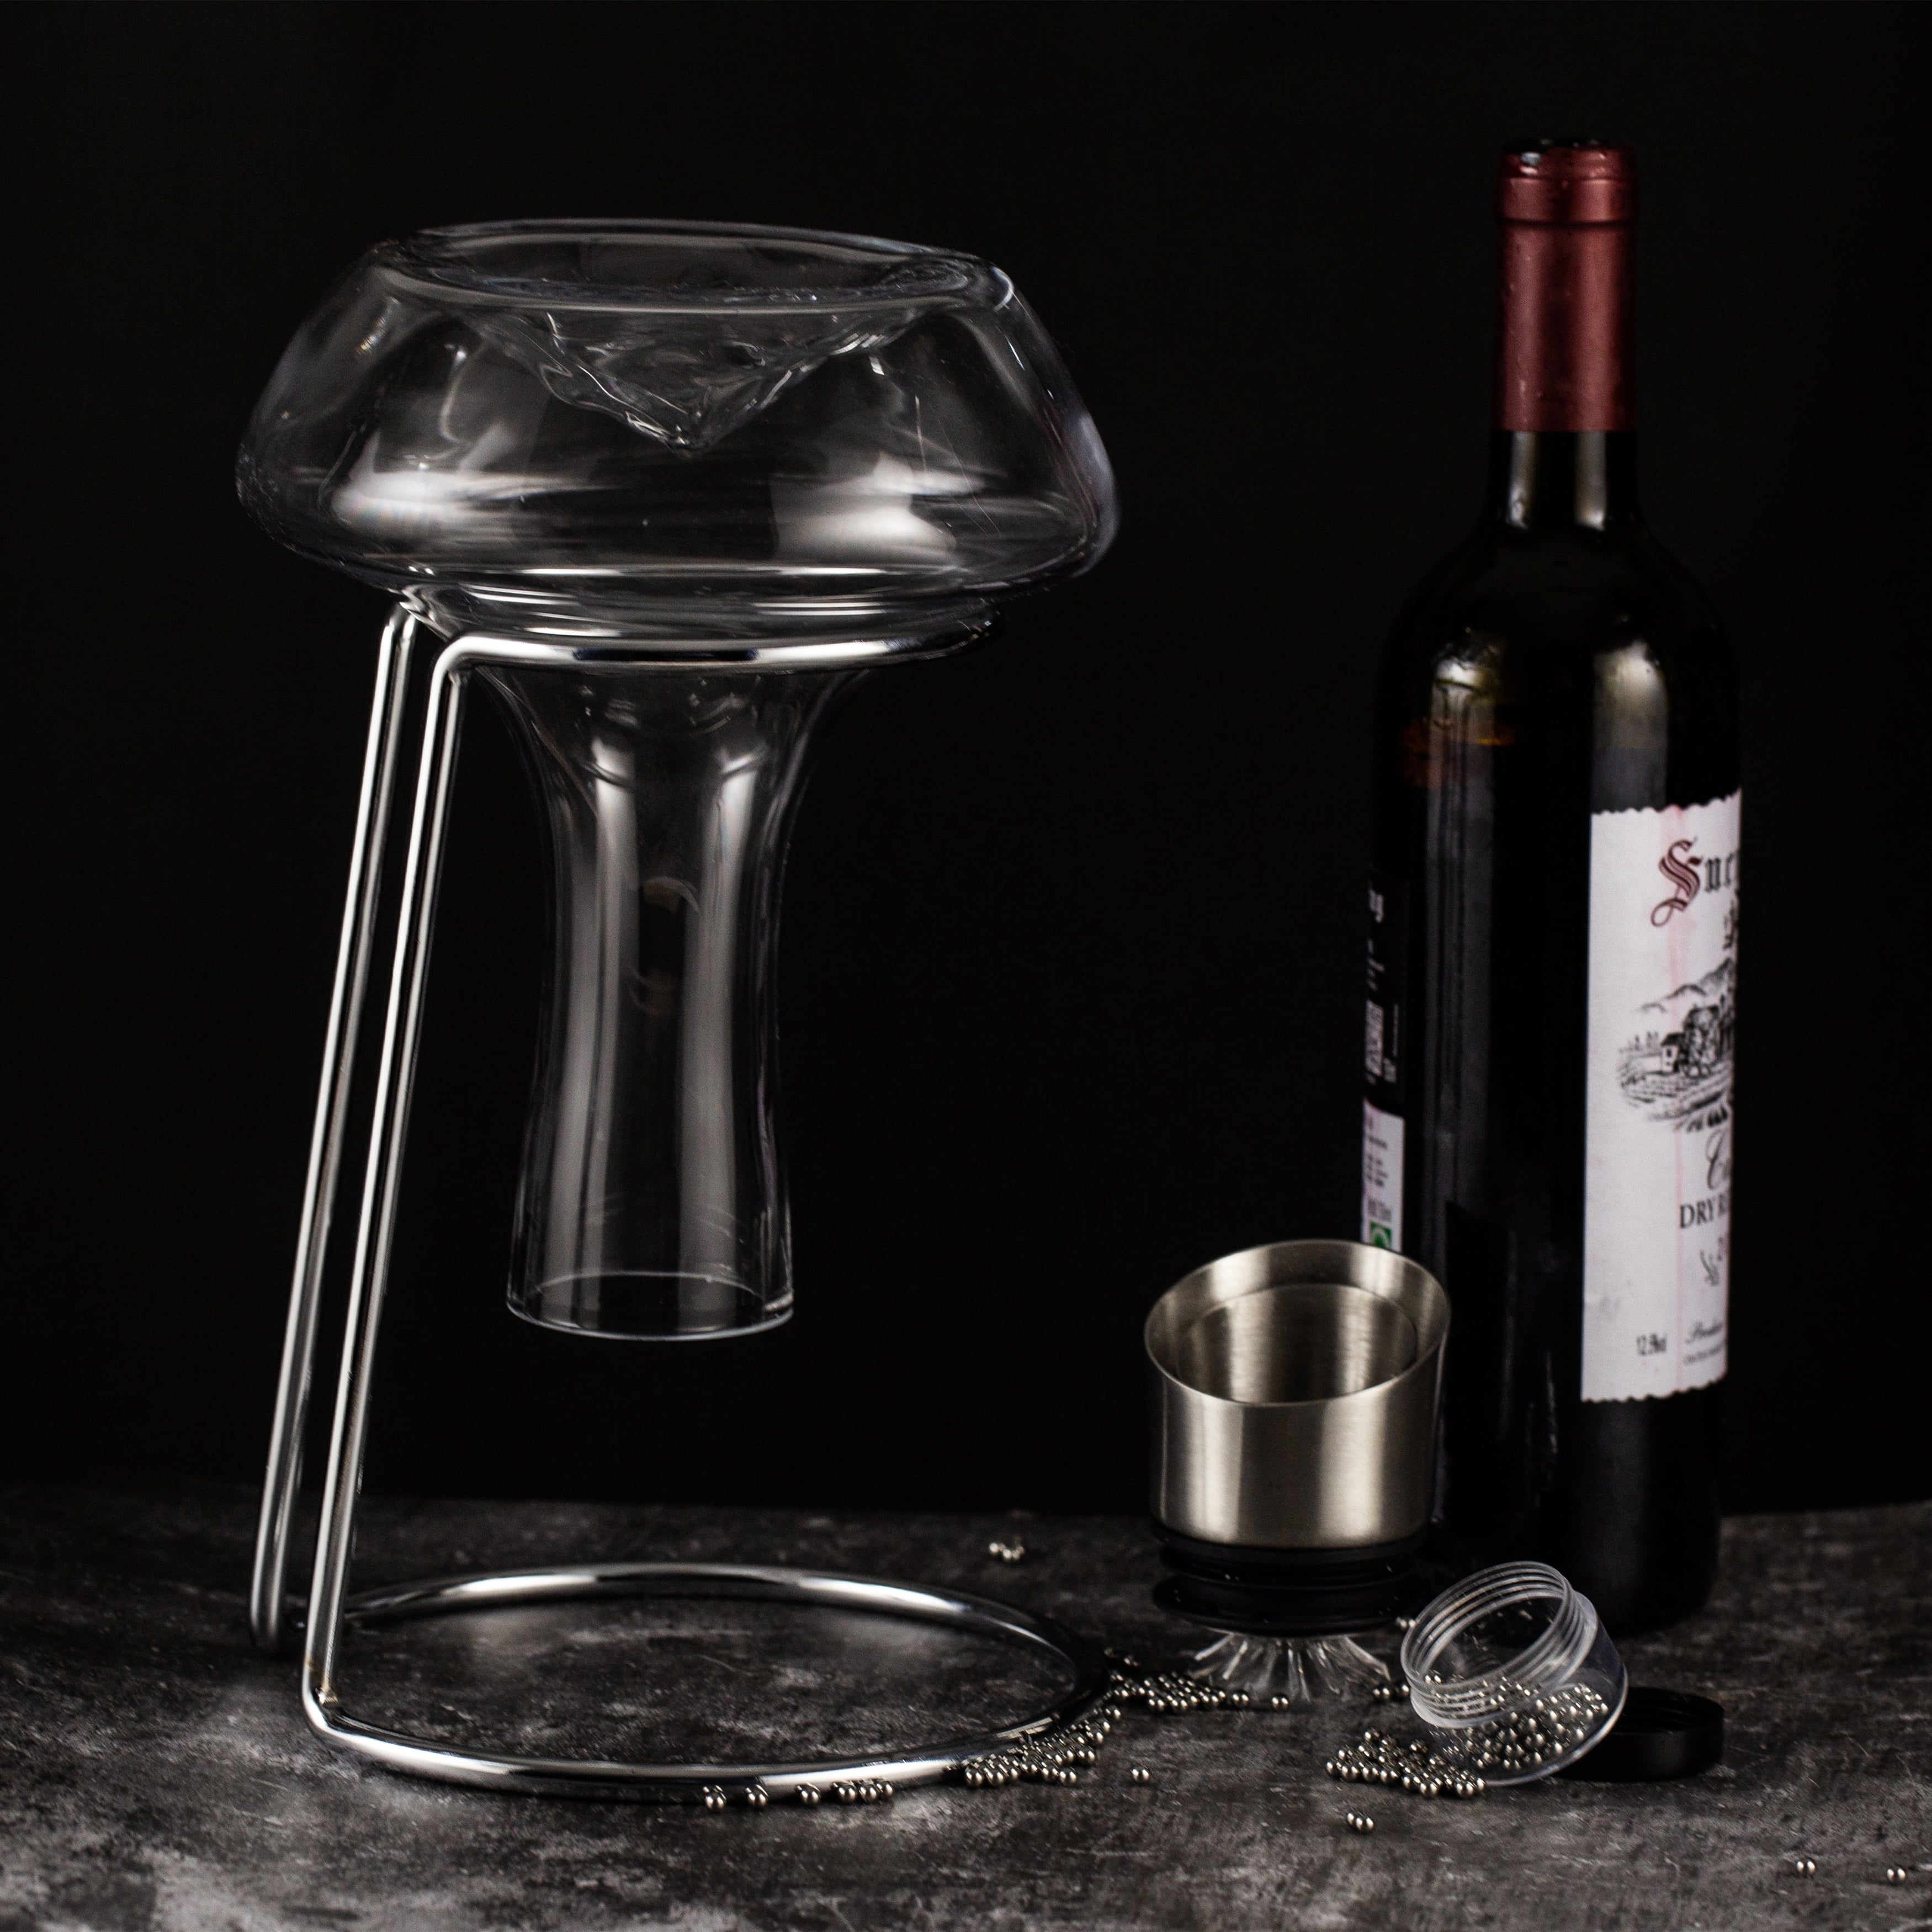 YouYah Wine Decanter Set,Red Wine Carafe with Built-in-Aerator,Wine  Aerator,Wine Gifts for Christmas,Stainless Steel Pourer Lid,Filter,100%  Hand Blown